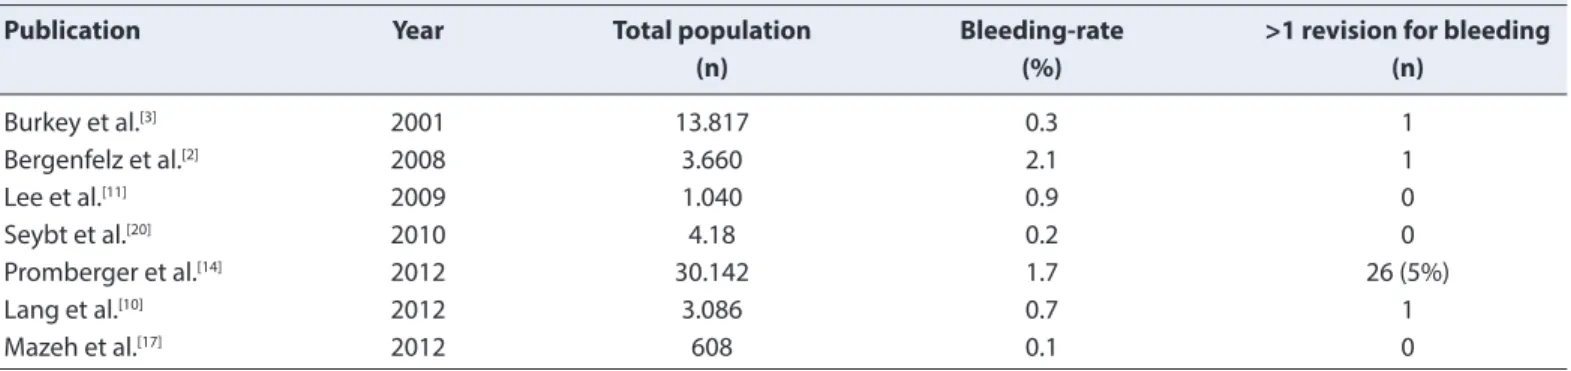 Table 4. Incidence of bleeding and number of revisions after thyroid surgery